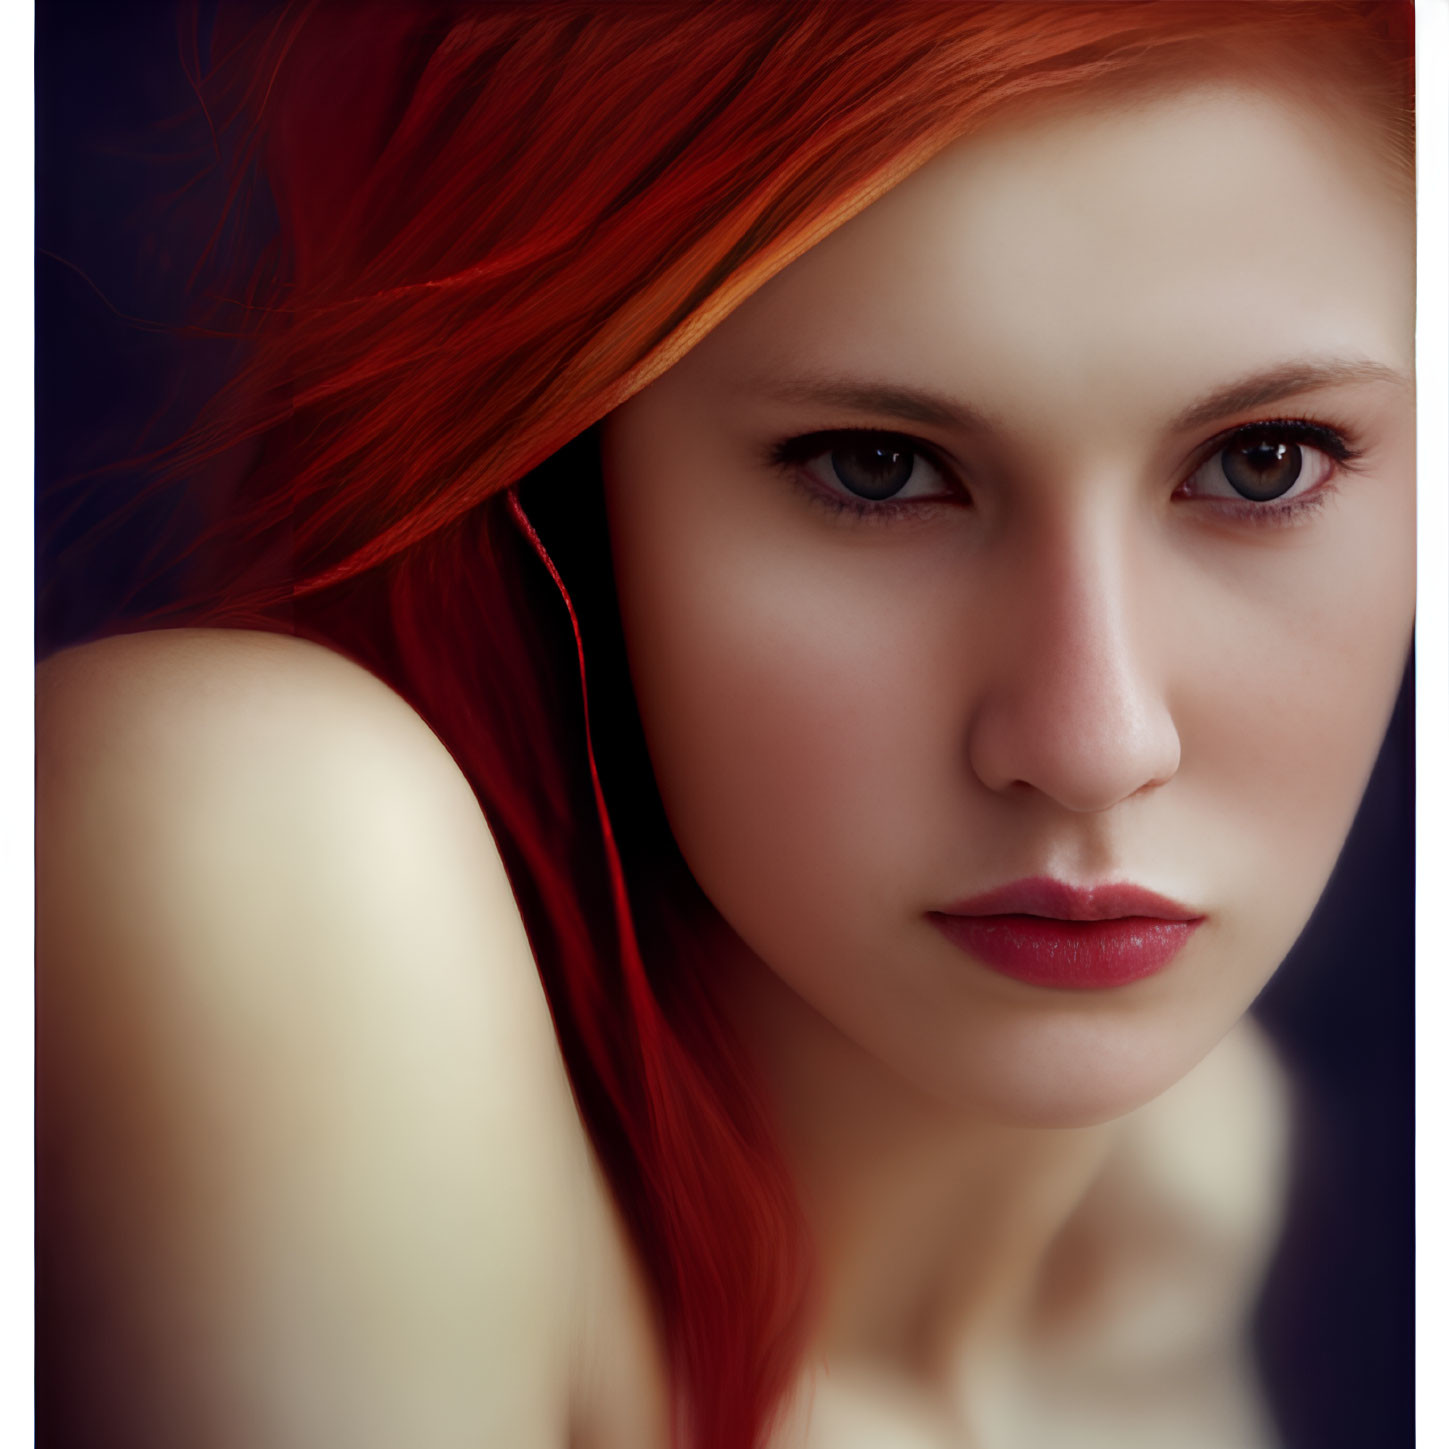 Close-up Portrait of Woman with Vibrant Red Hair and Piercing Gaze